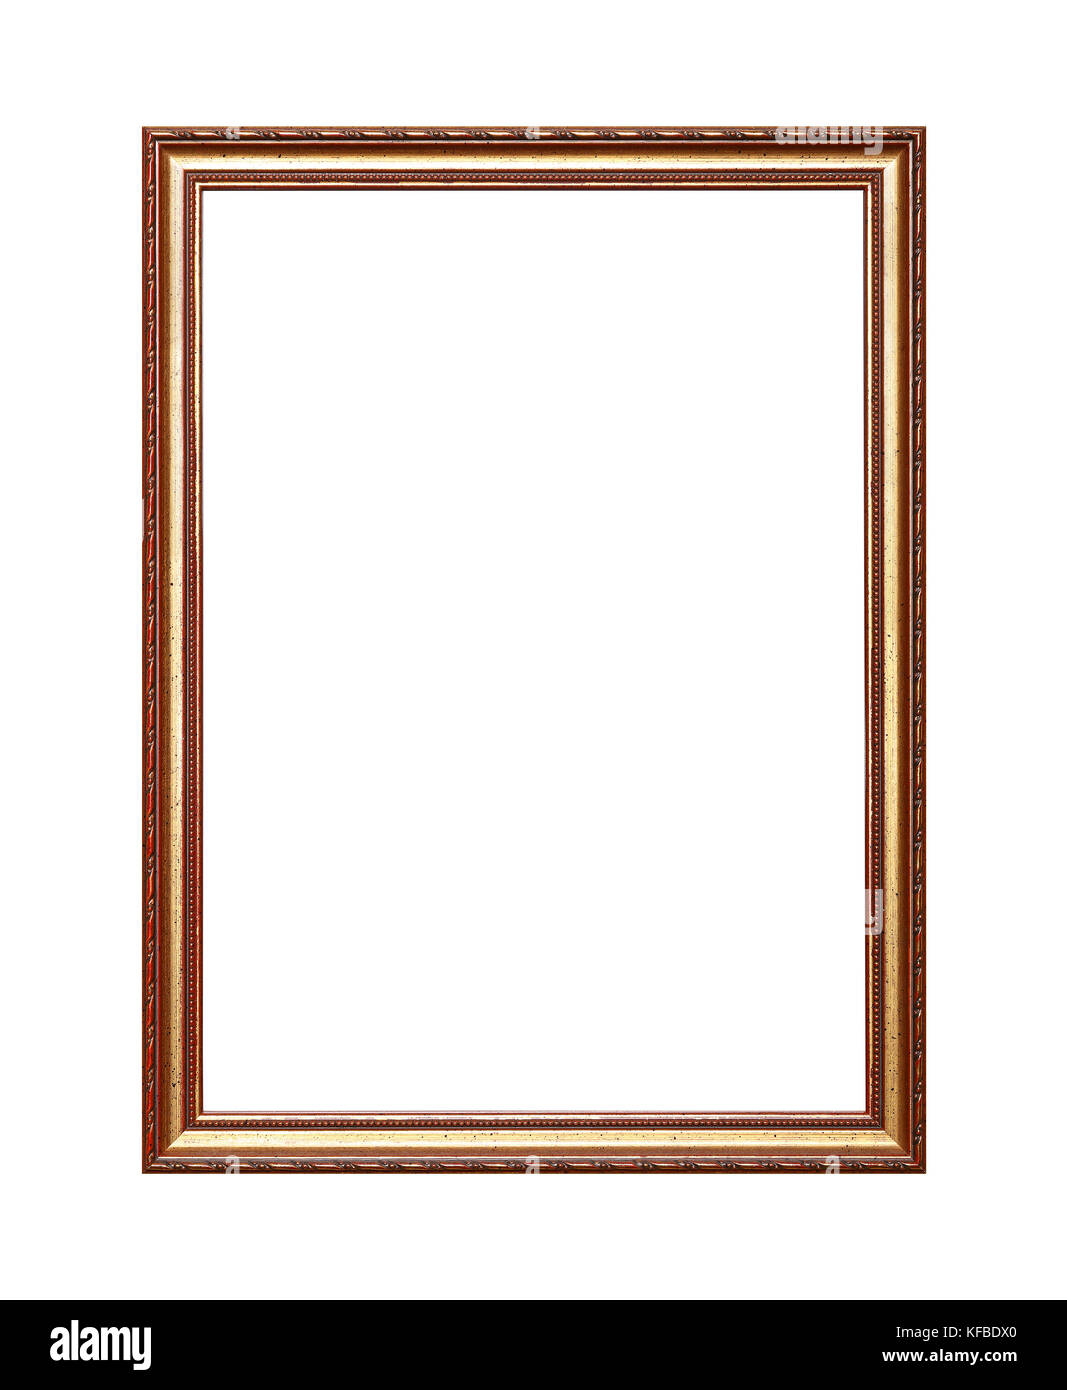 Antique old baroque ornate wooden classic golden painted vertical rectangular frame for picture, photo or mirror, isolated on white background, close  Stock Photo